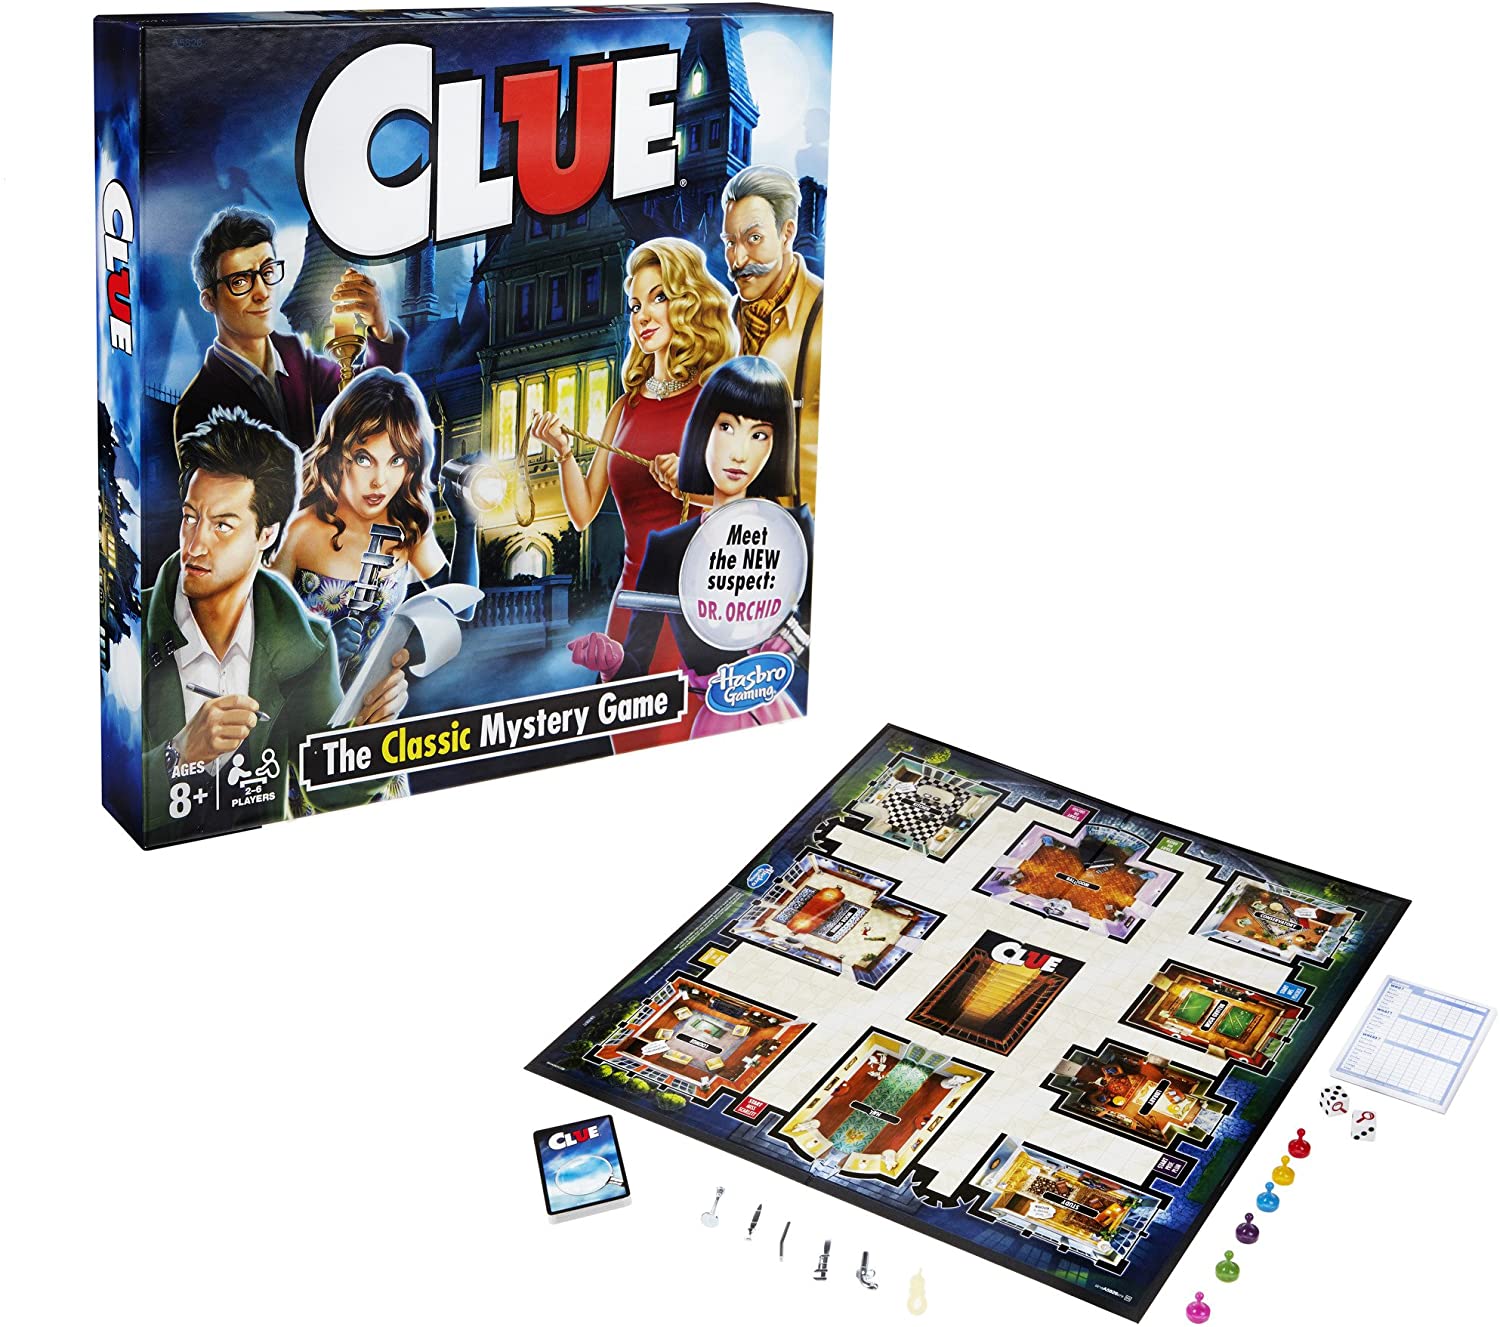 Find out about Clue